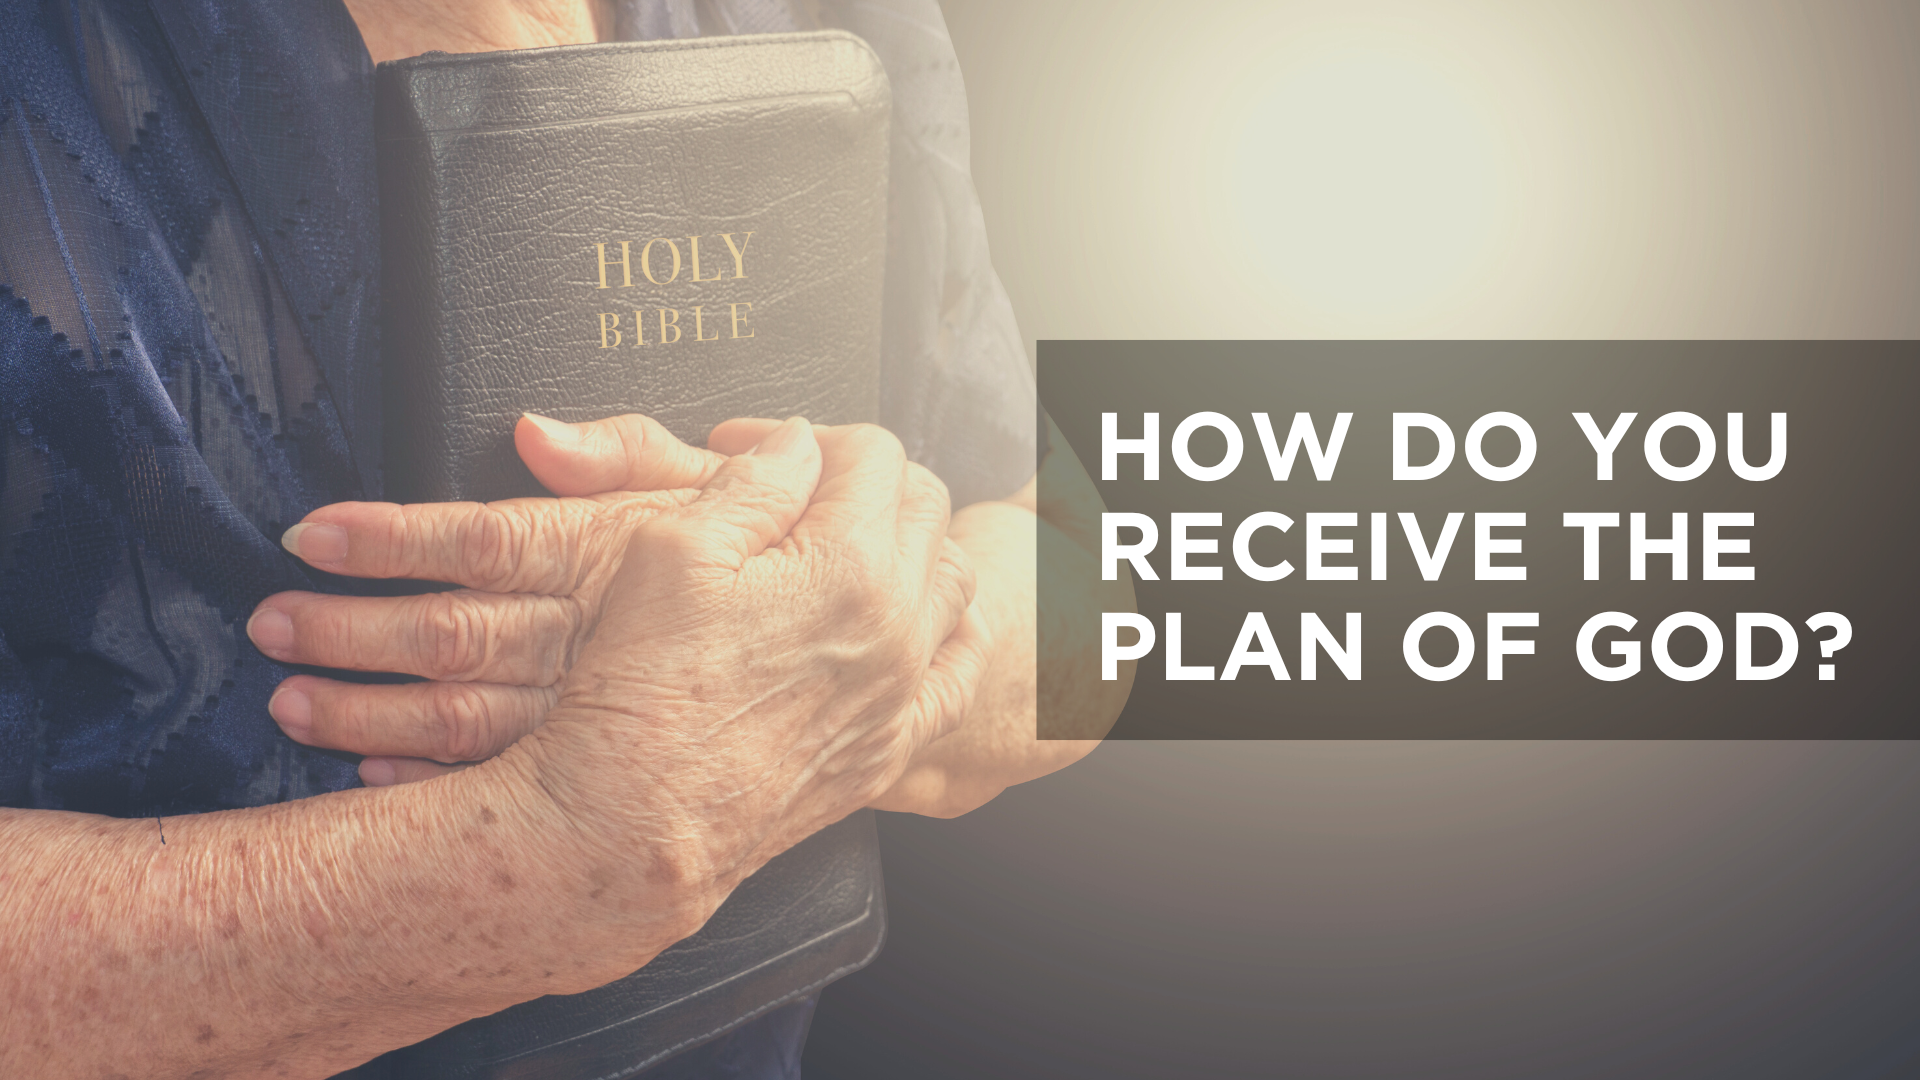 How Do You Receive the Plan of God?